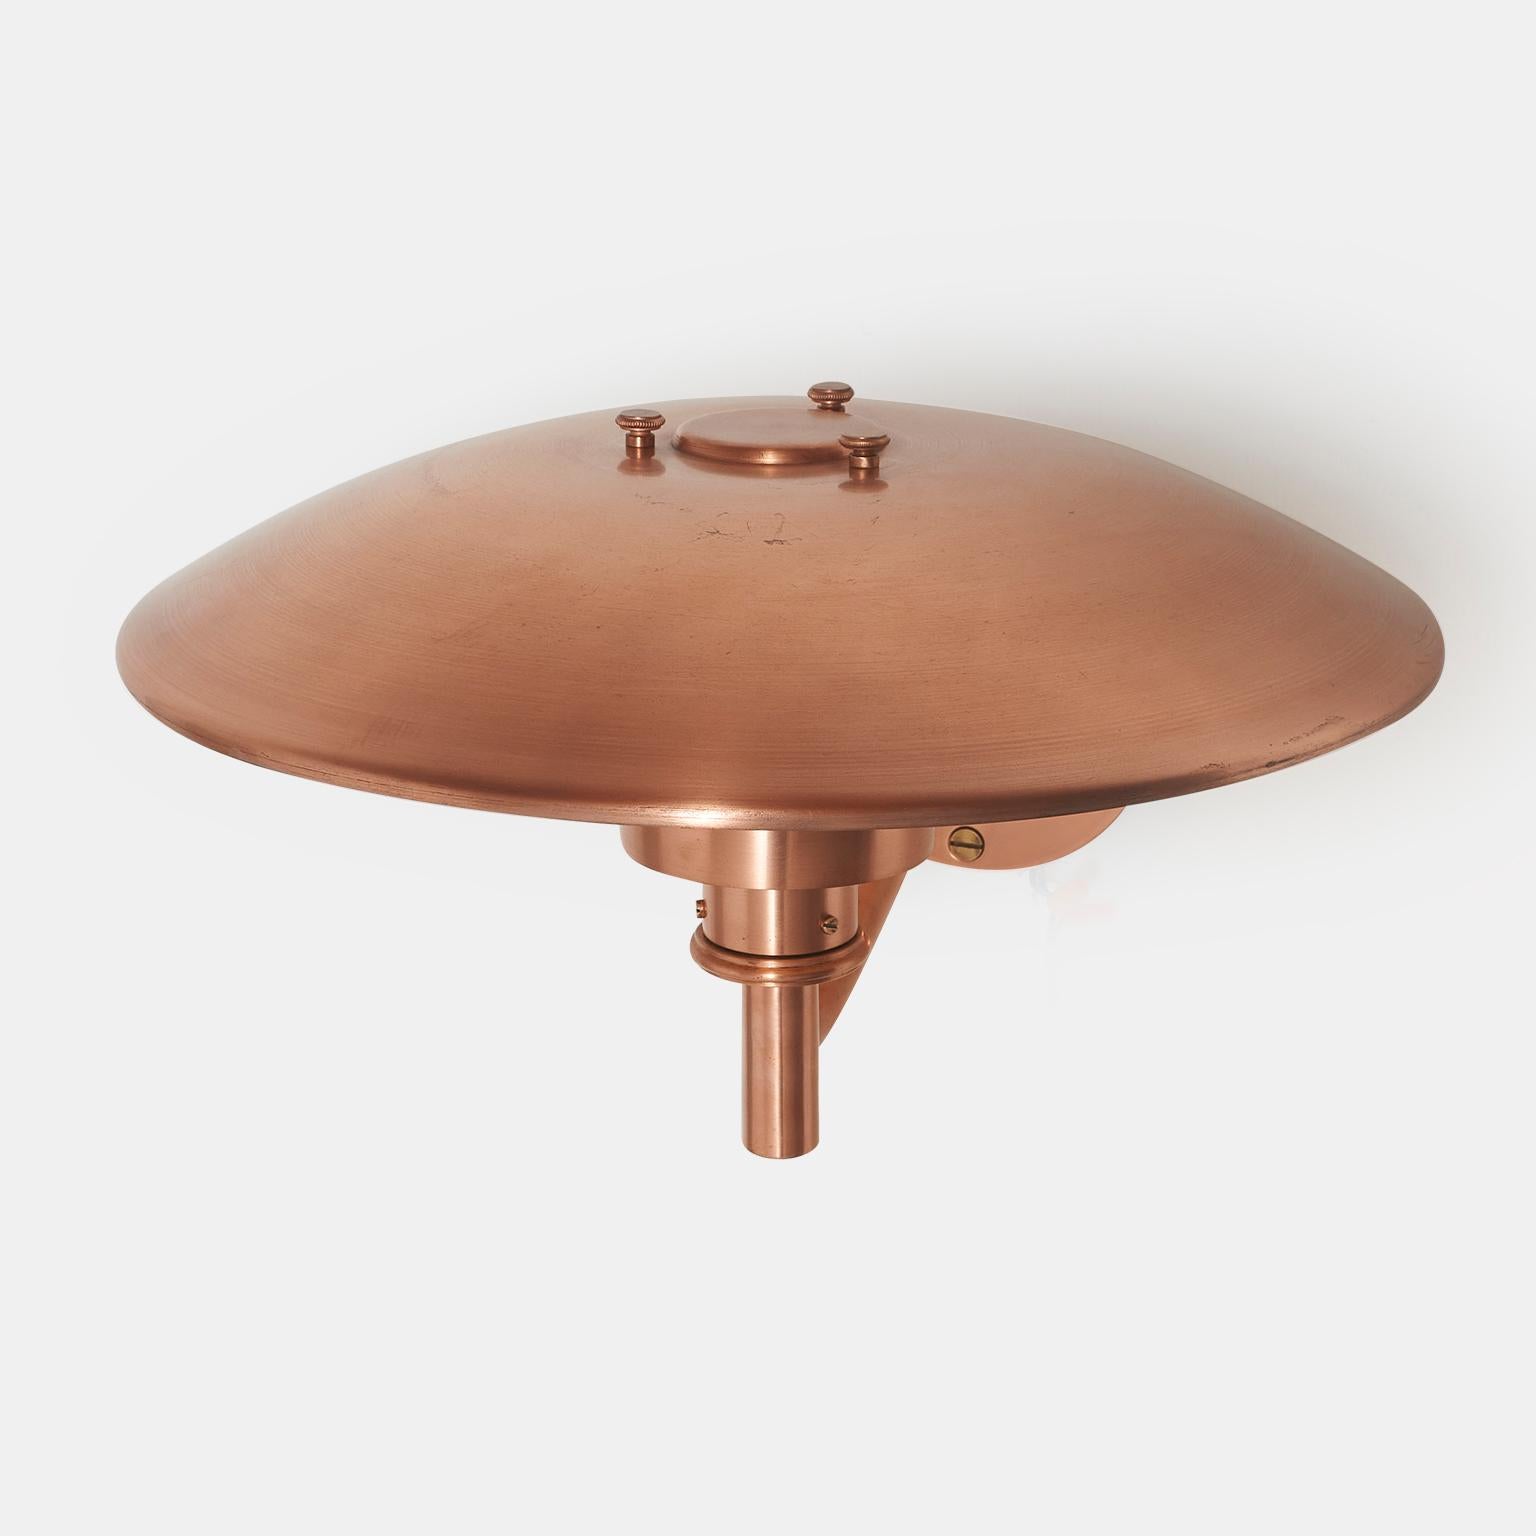 20th Century Curved Arm PH 4½/3 Copper Sconce by Poul Henningsen For Sale